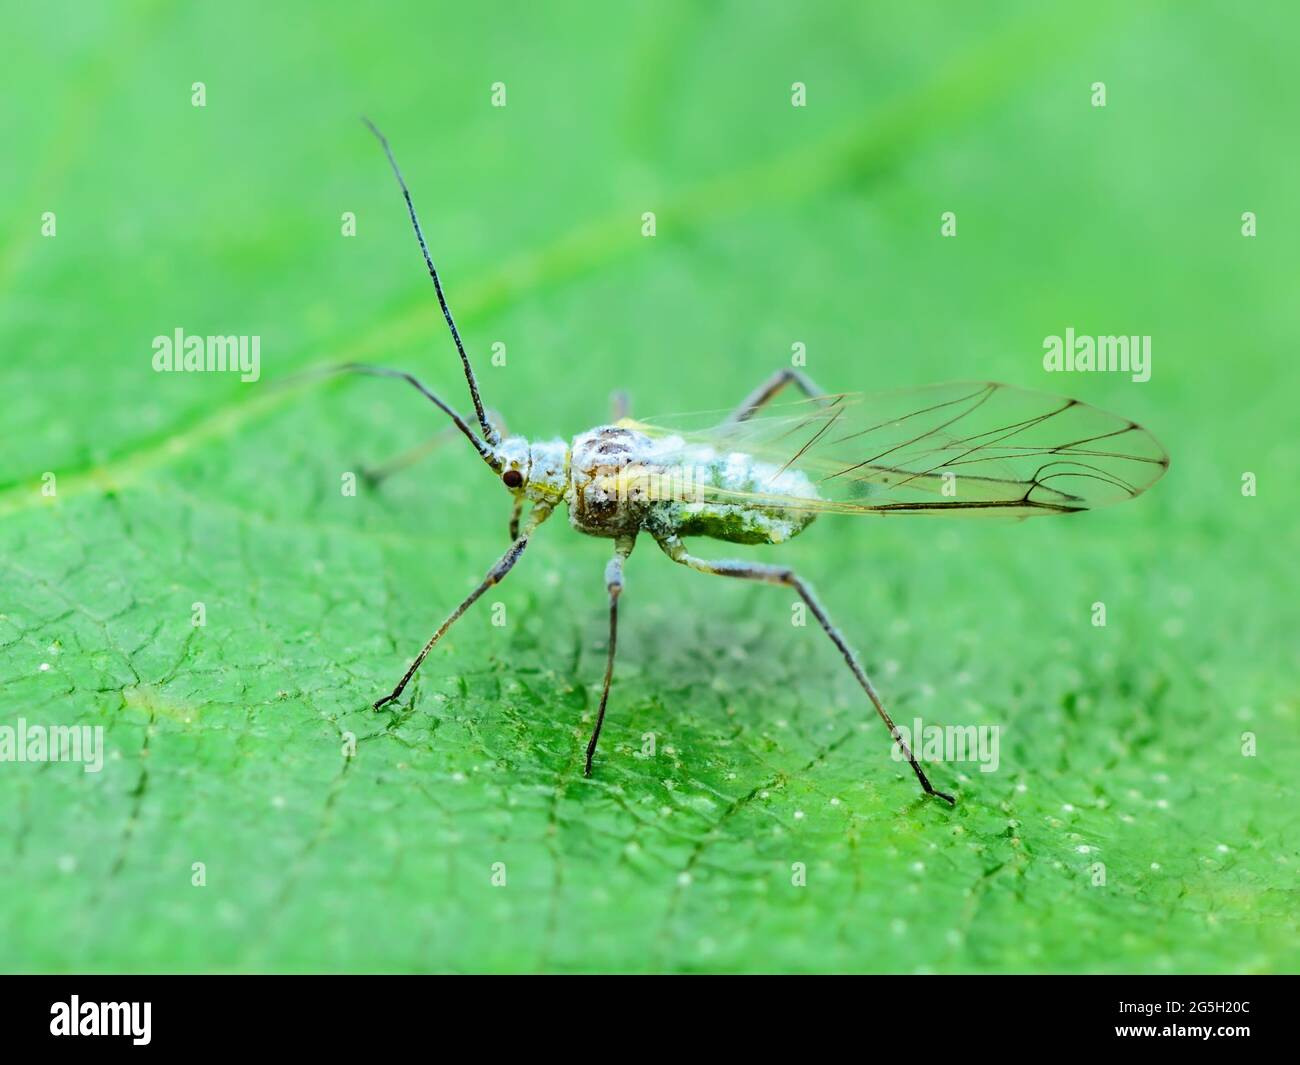 Adult Aphid on Green Leaf. Greenfly or Green Aphid Garden Parasite Insect Pest Macro Stock Photo